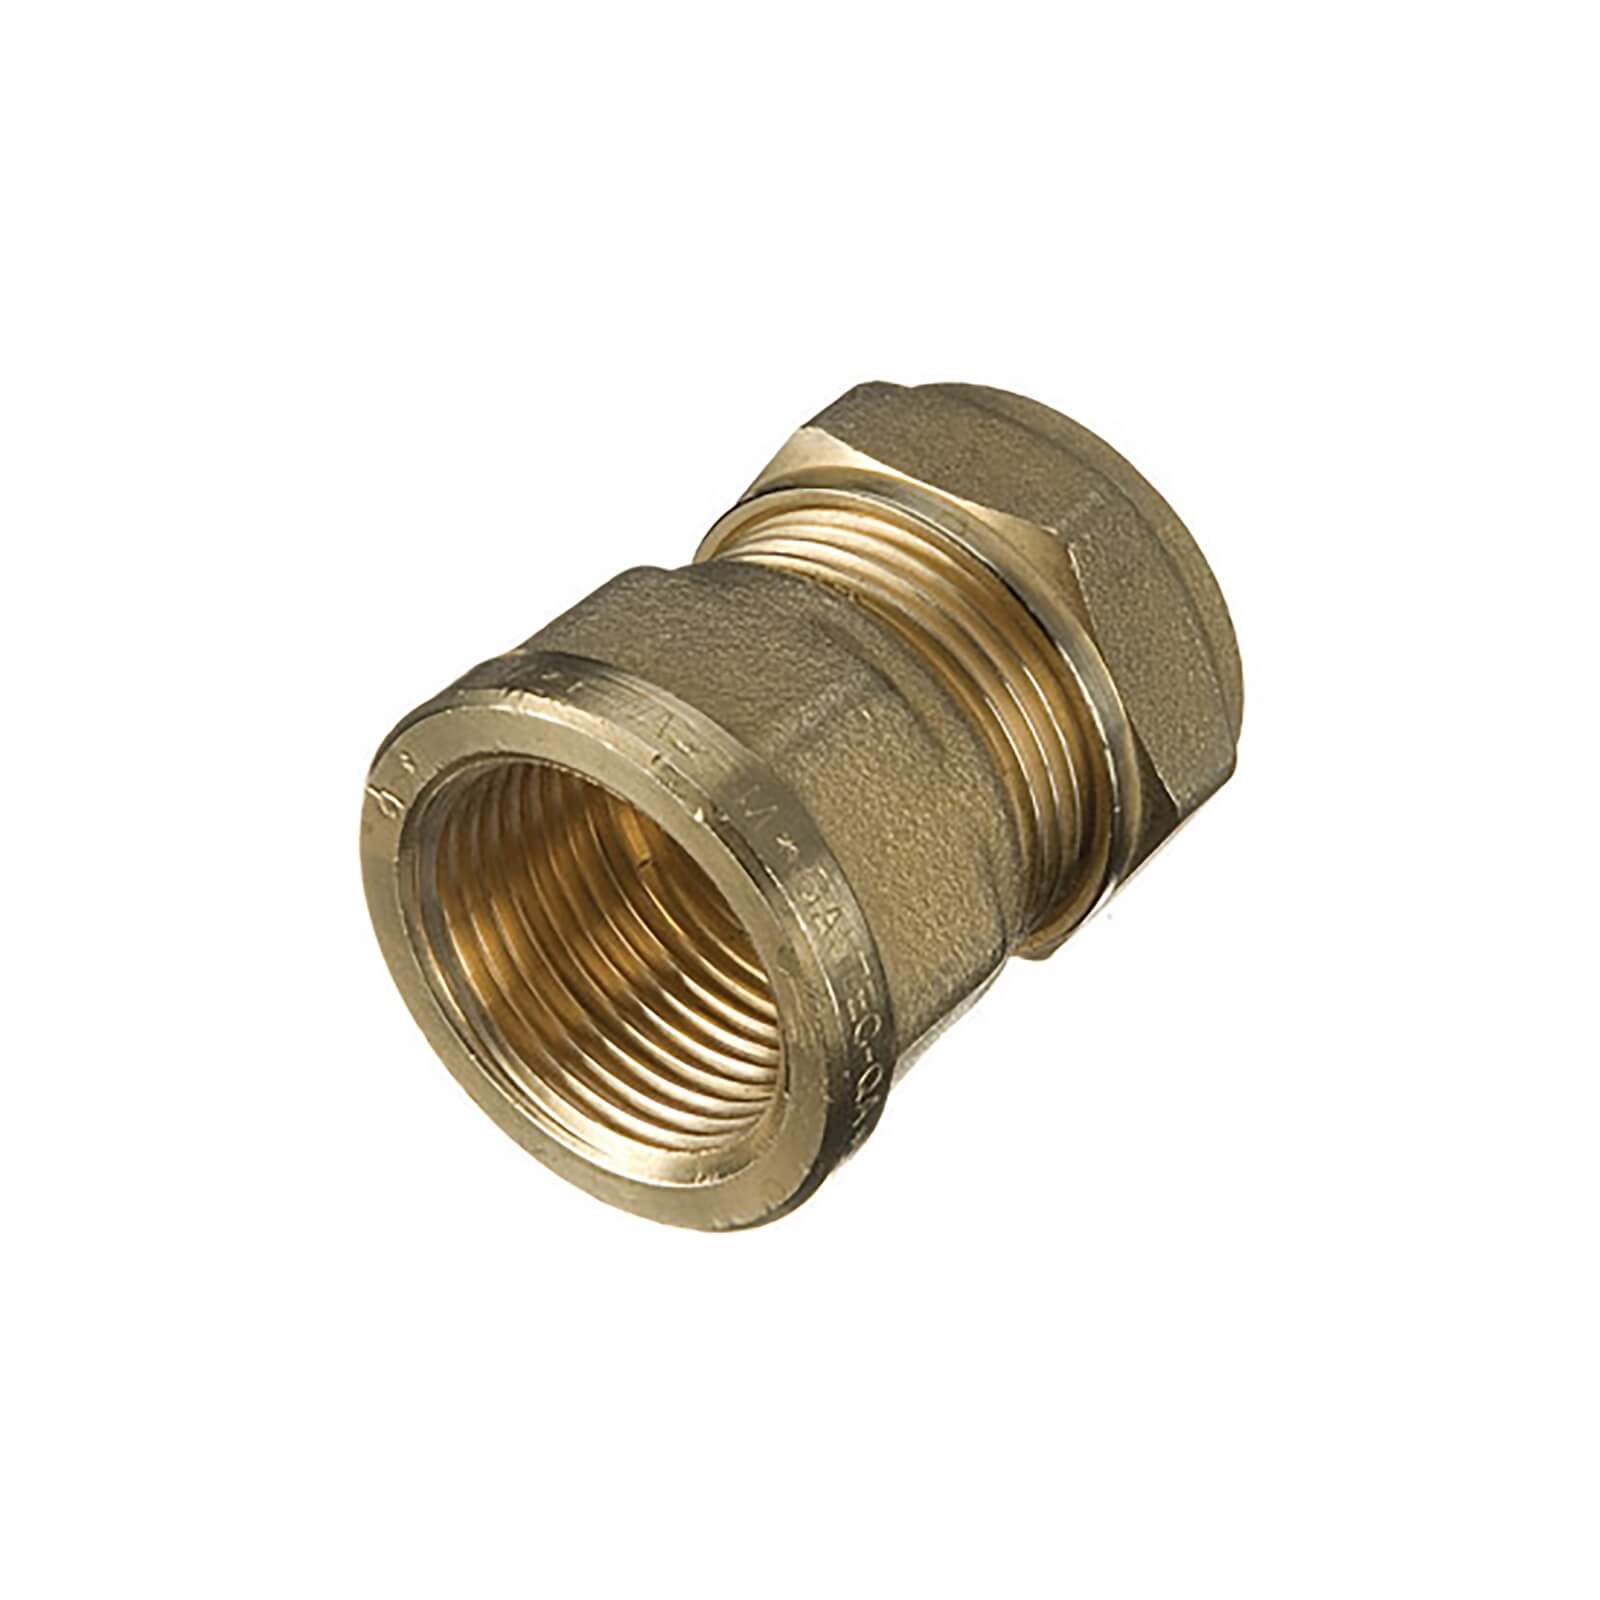 Compression Female Coupler 22mm x 0.75in